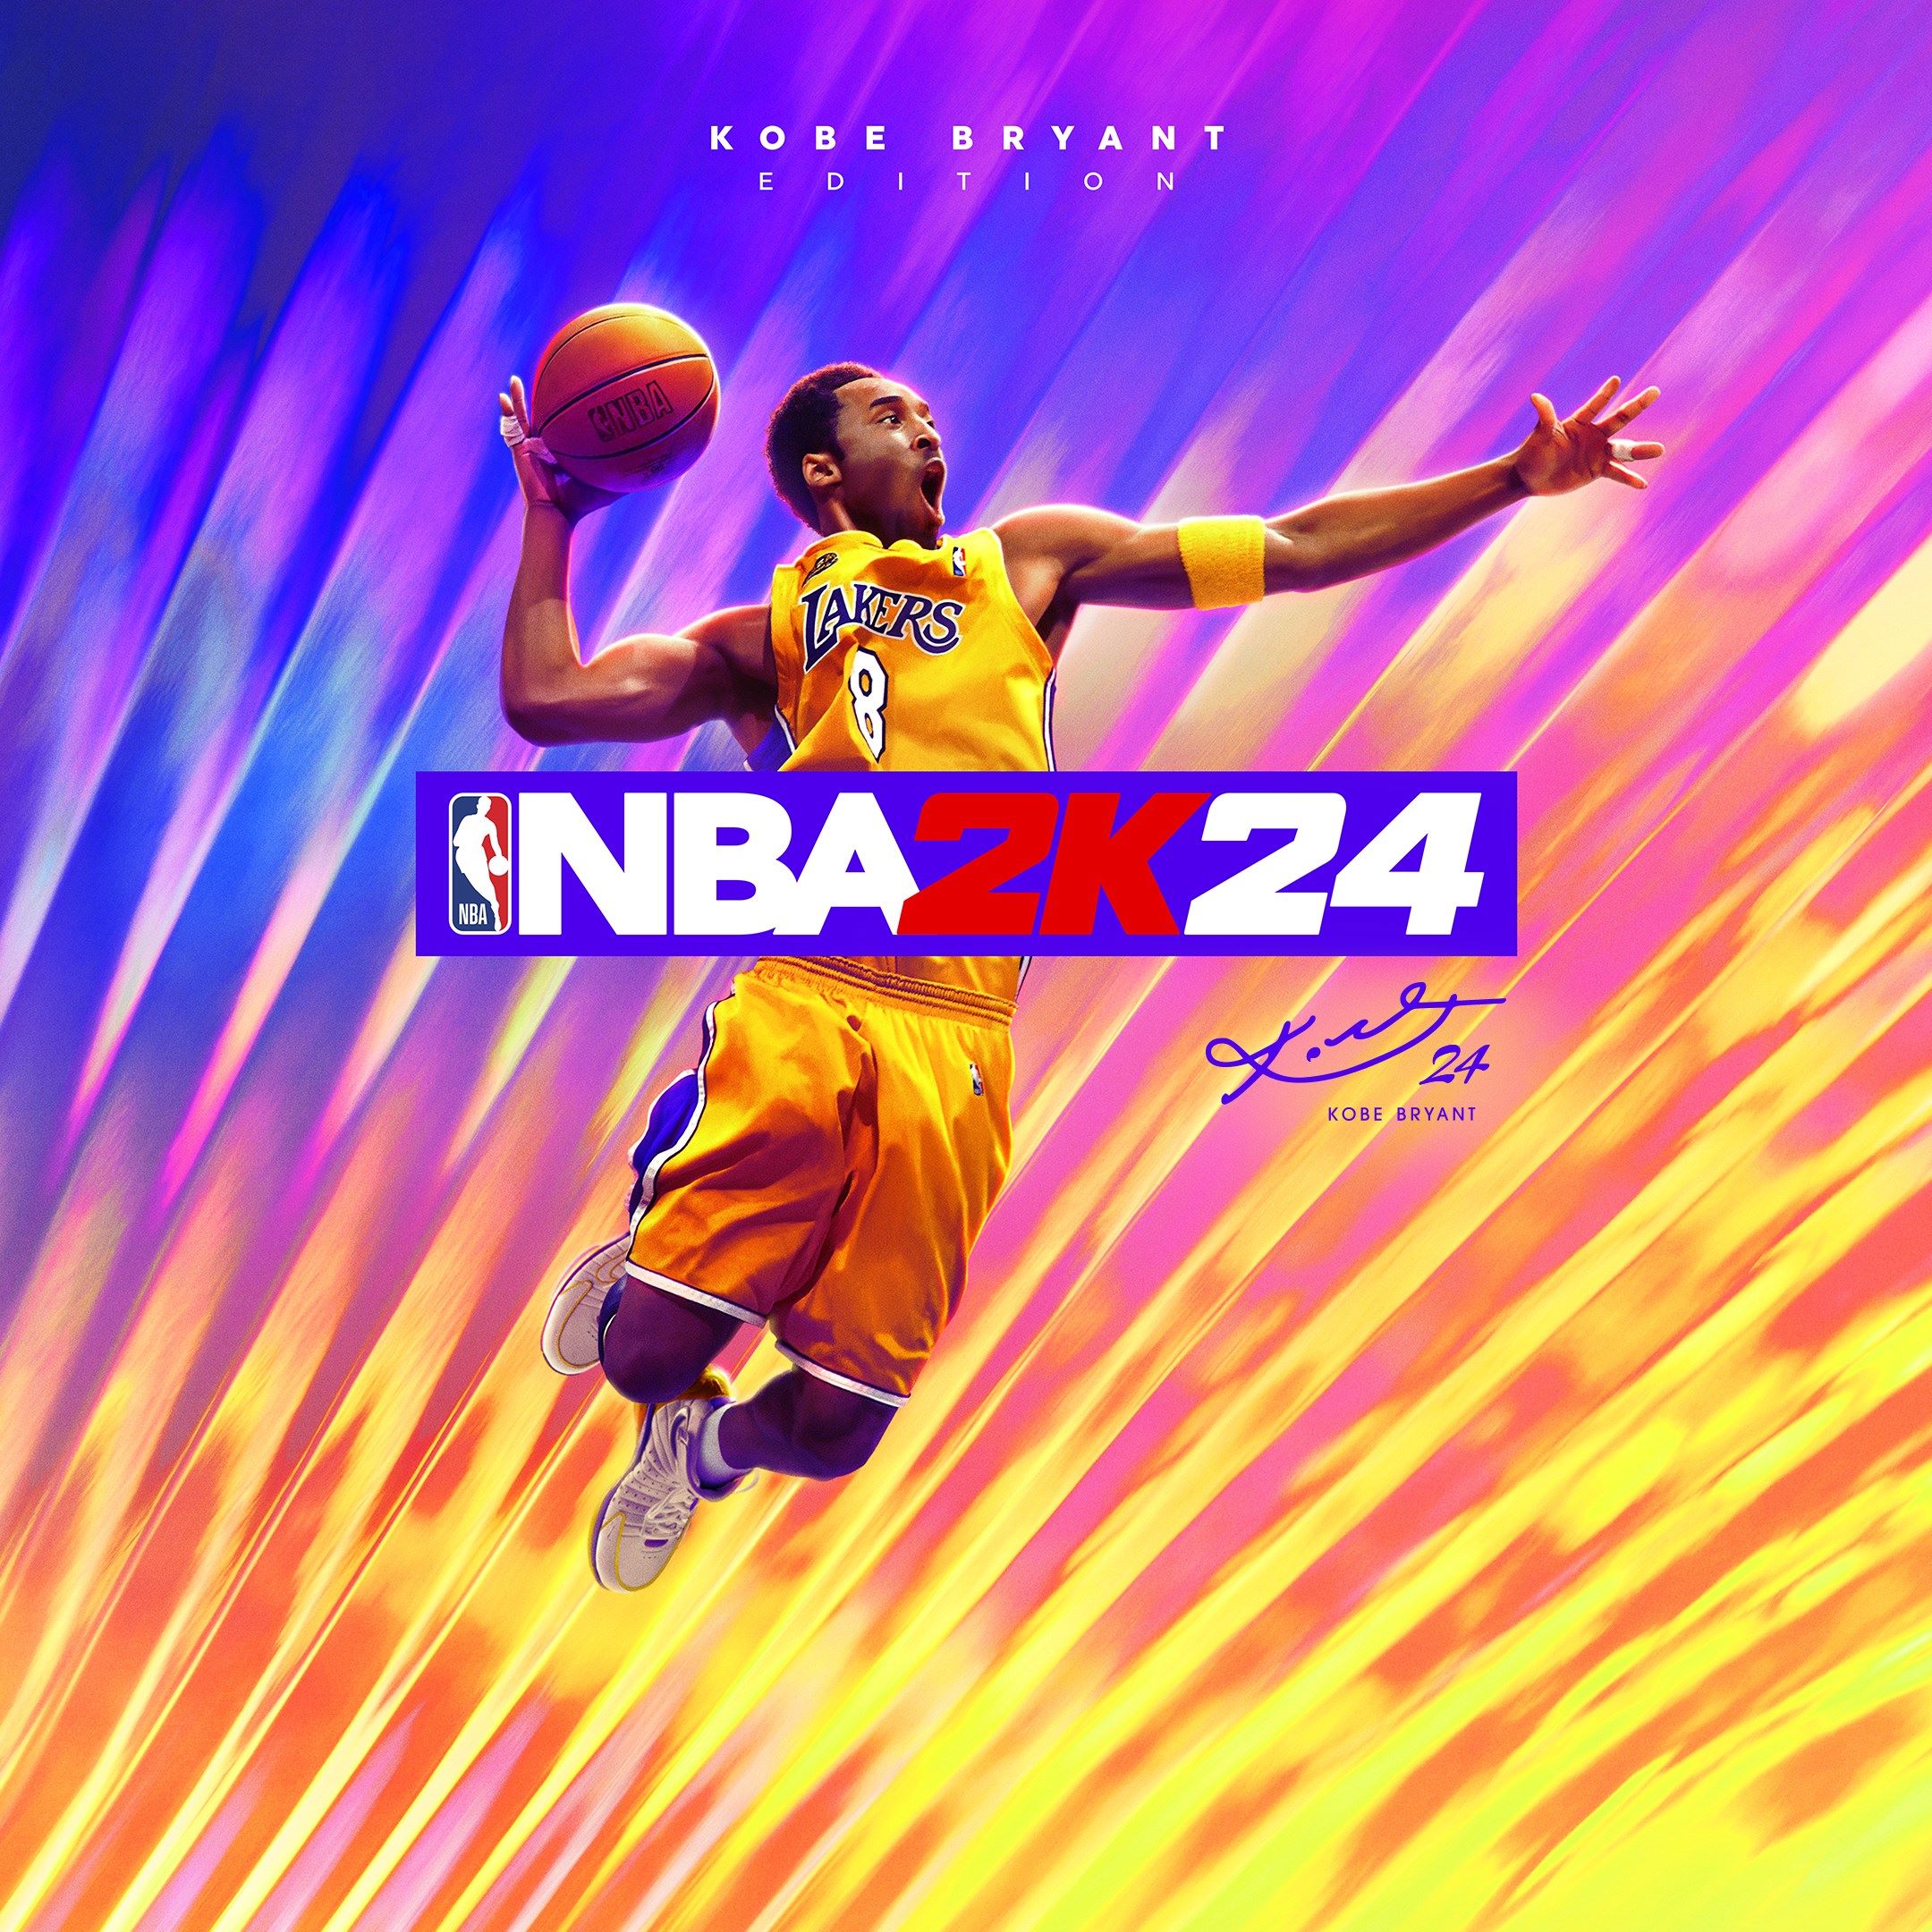 NBA 2K24 for Xbox Series X|S